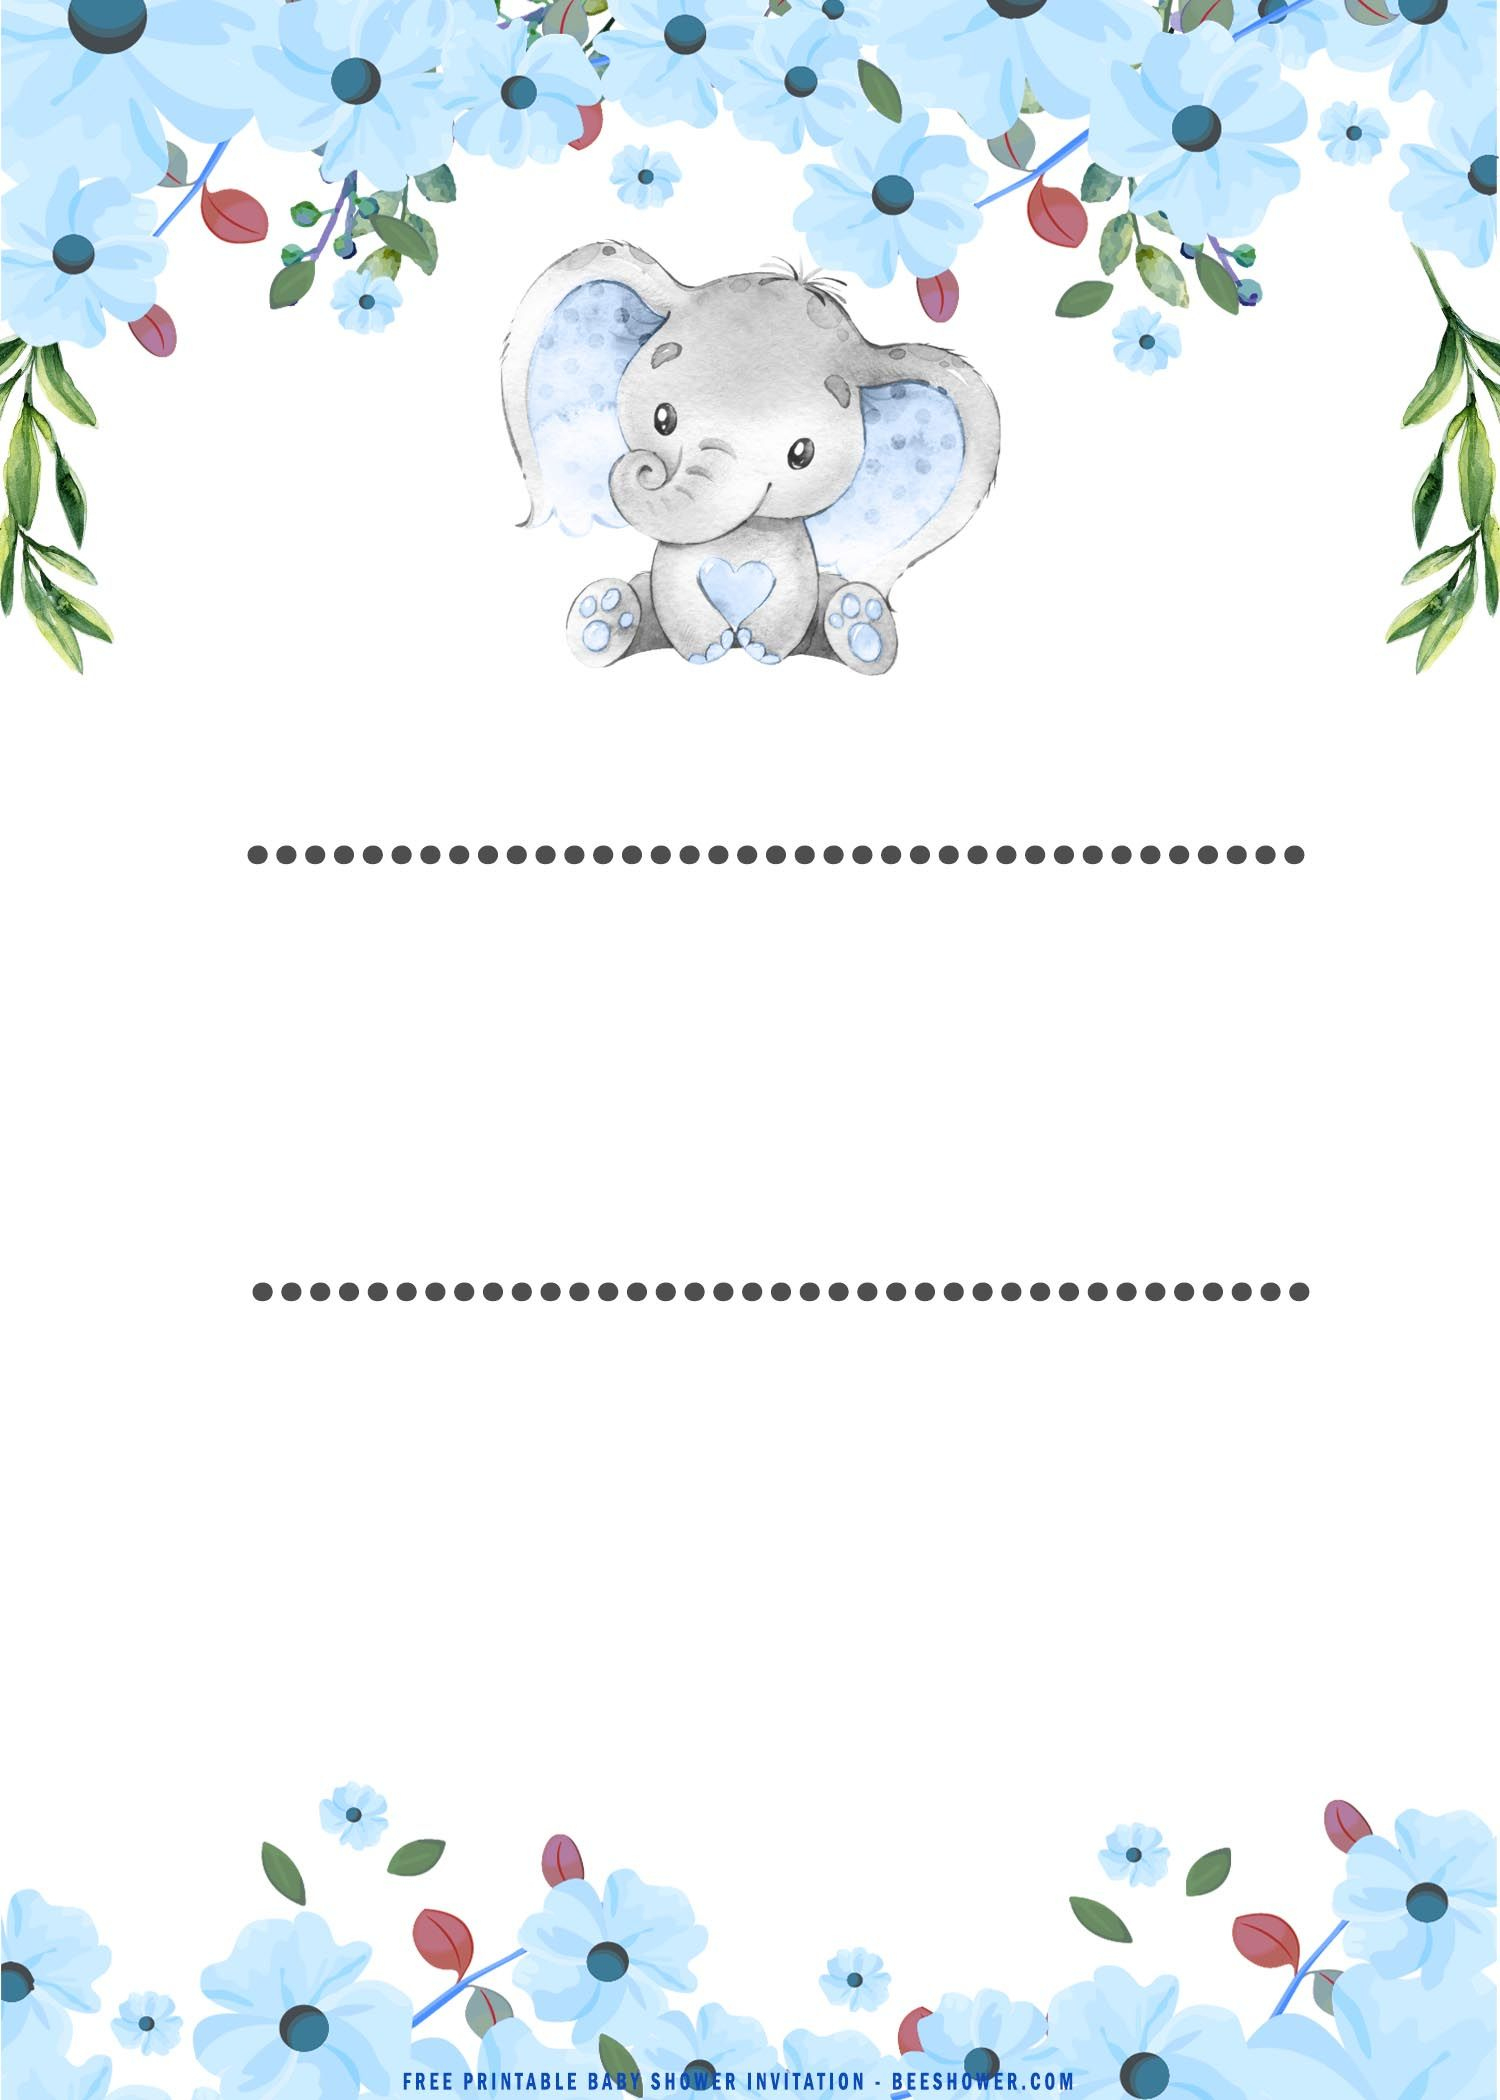 Free Printable) - Cute Baby Elephant Baby Shower Invitation throughout Free Baby Elephant Printables